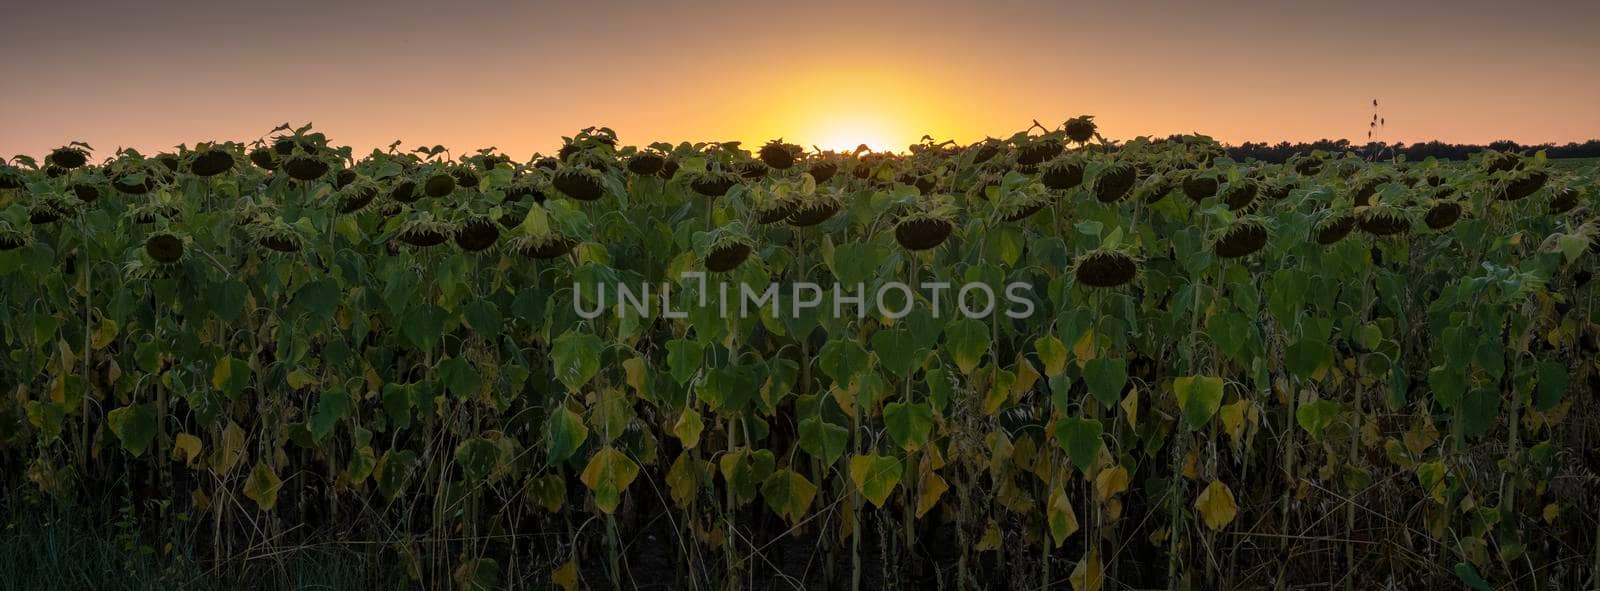 dark sunflowers at dusk and colorful sky of setting sun